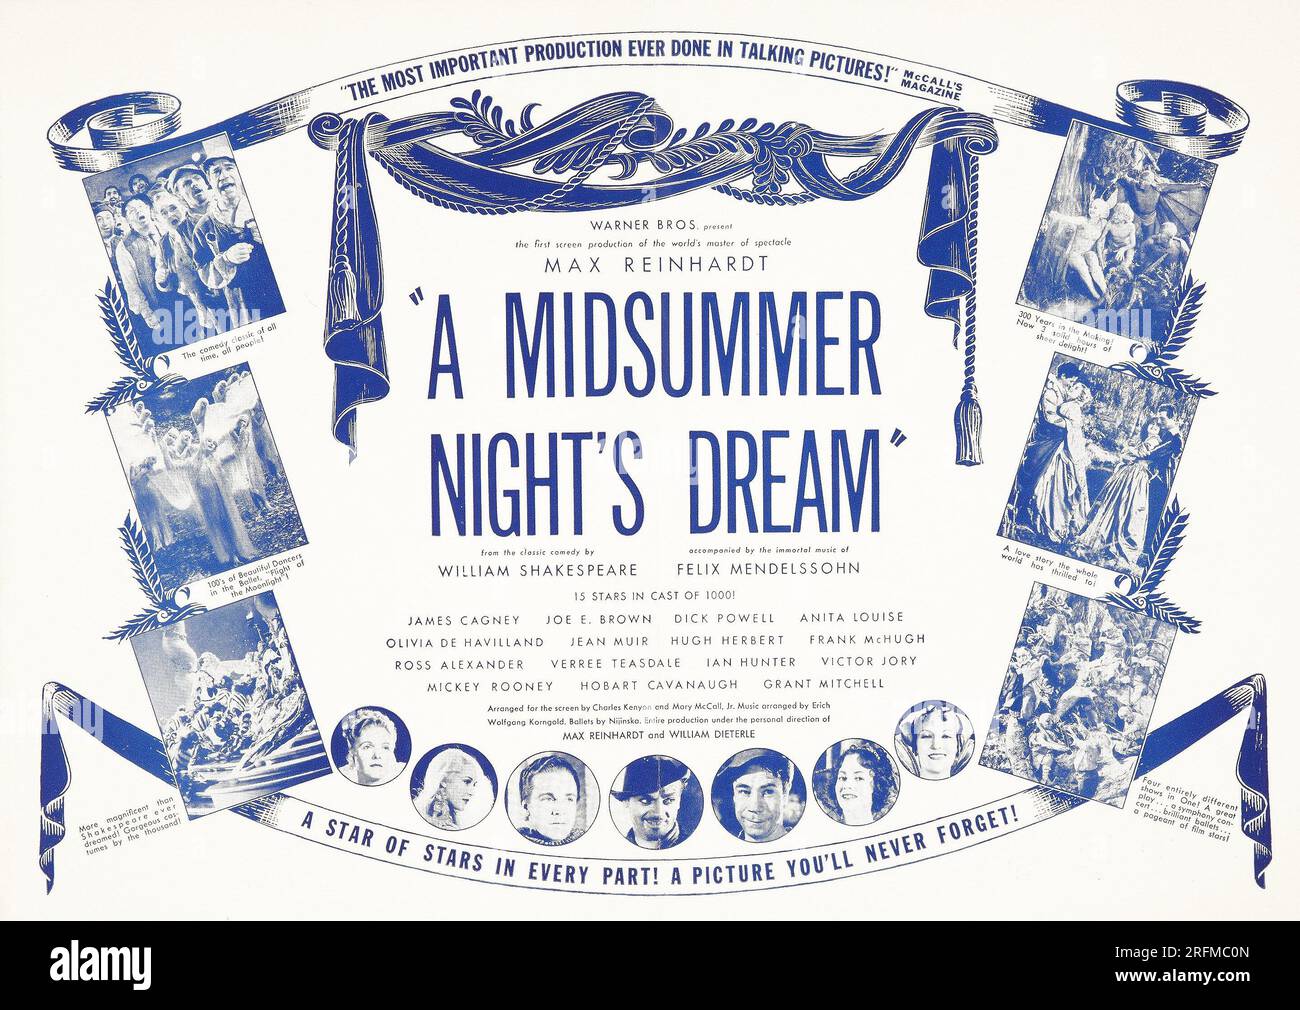 lobby card for Max Reinhardt's 'A Midsummer Night’s Dream' (1935). A Midsummer Night's Dream is a 1935 American film of William Shakespeare's play, directed by Max Reinhardt and William Dieterle. Produced by Henry Blanke and Hal Wallis for Warner Brothers, and adapted by Charles Kenyon and Mary C. McCall Jr. from Reinhardt's Hollywood Bowl production of the previous year. Felix Mendelssohn's music was extensively used, as re-orchestrated by Erich Wolfgang Korngold. Stock Photo